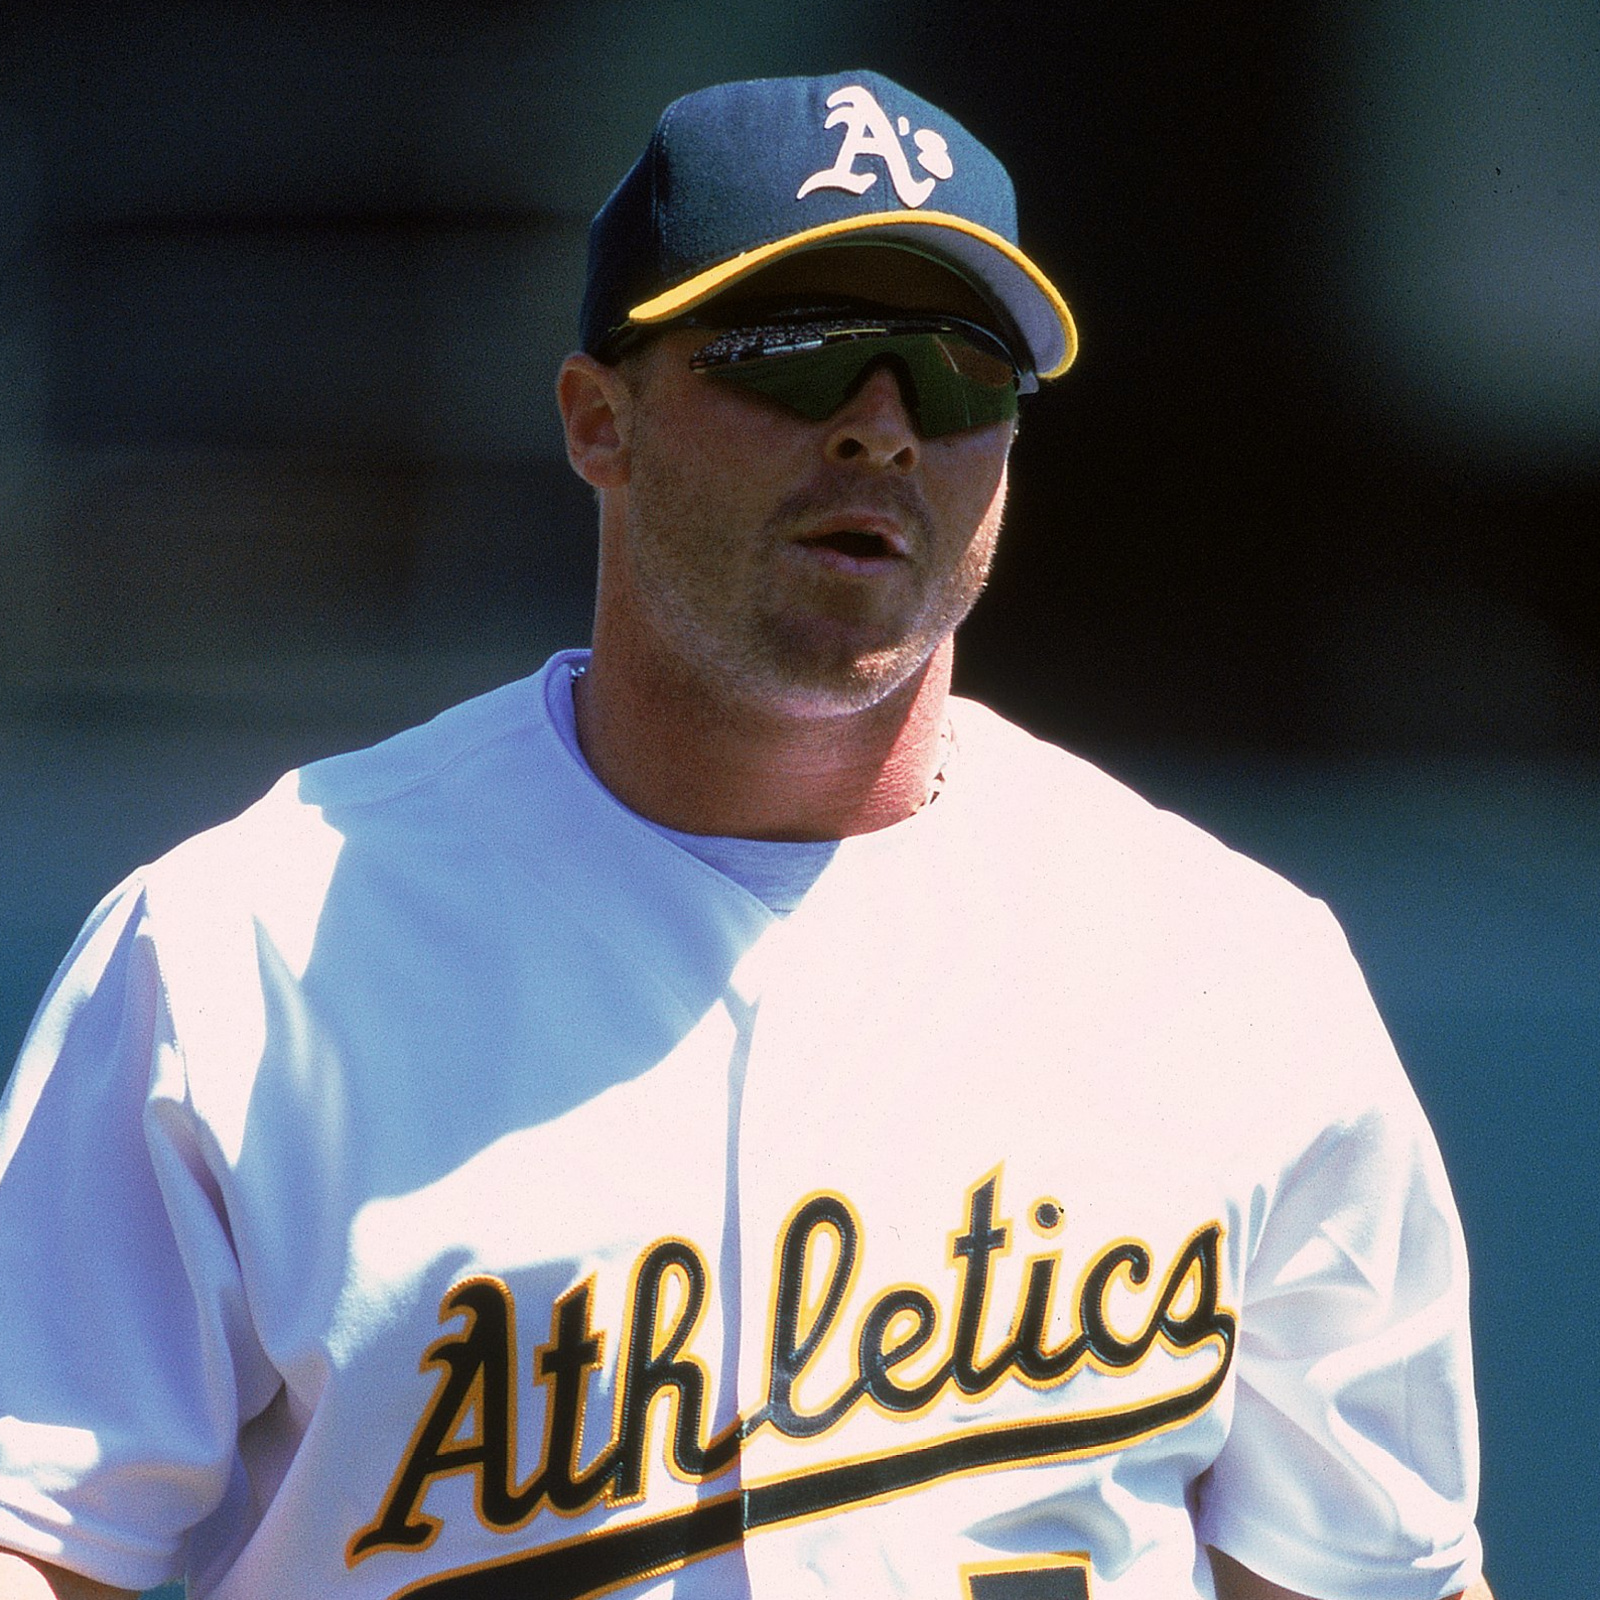 Jeremy Giambi Died By Suicide, Self-Inflicted Gunshot Wound